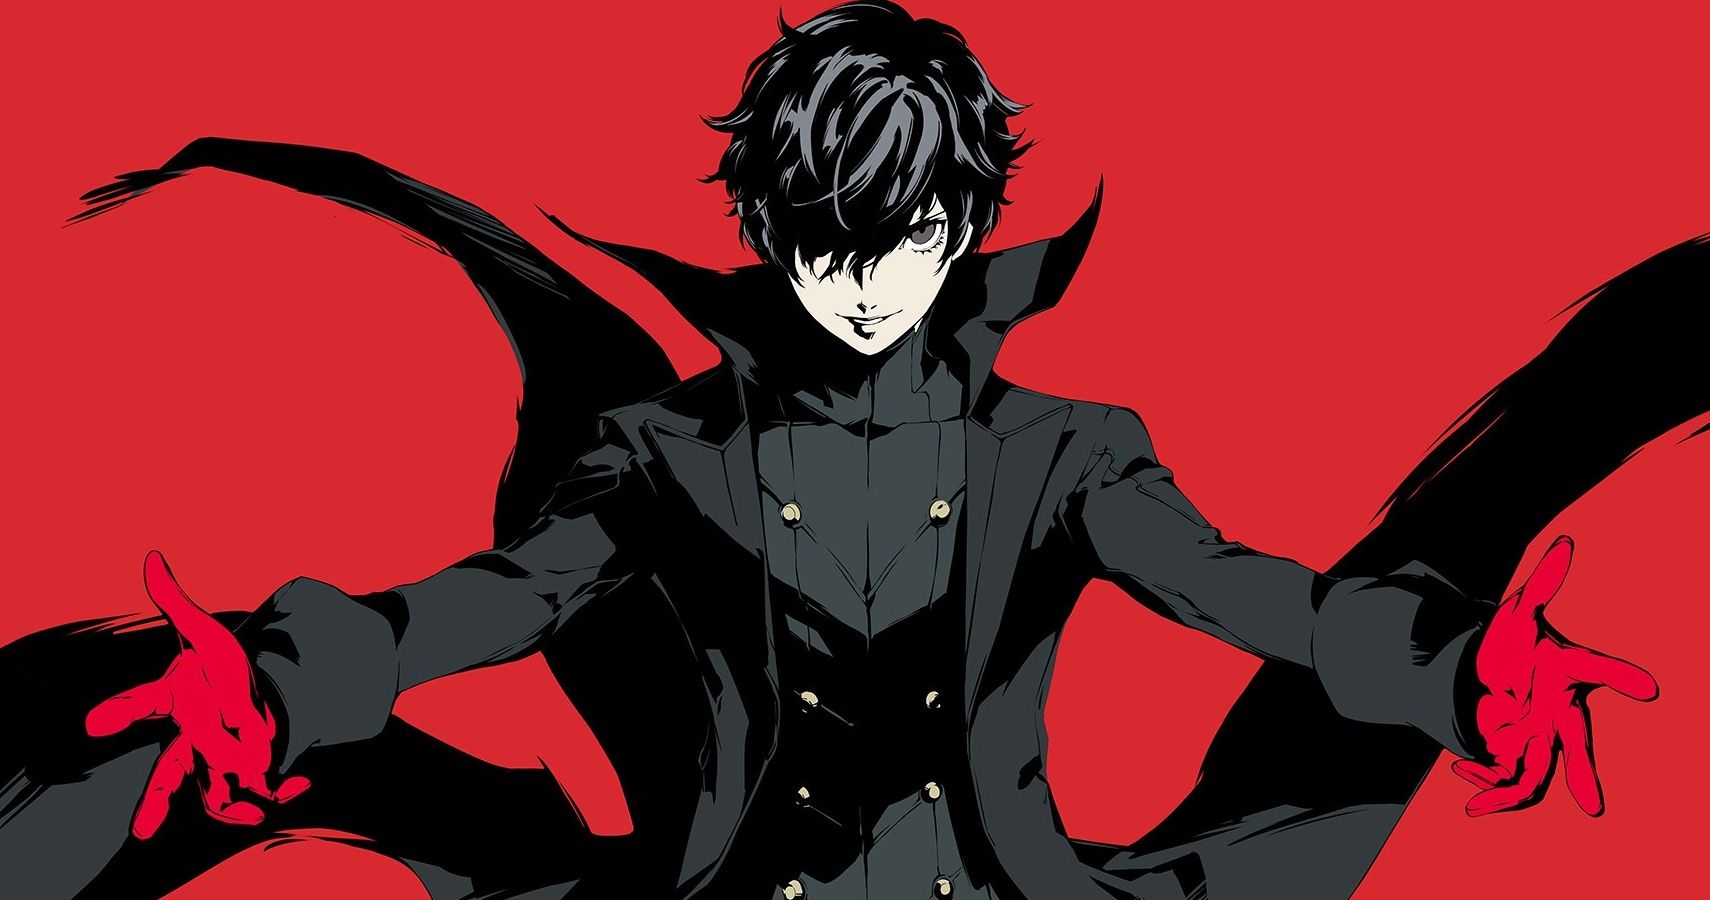 Persona 5: 10 Unanswered Questions We Still Have About Joker